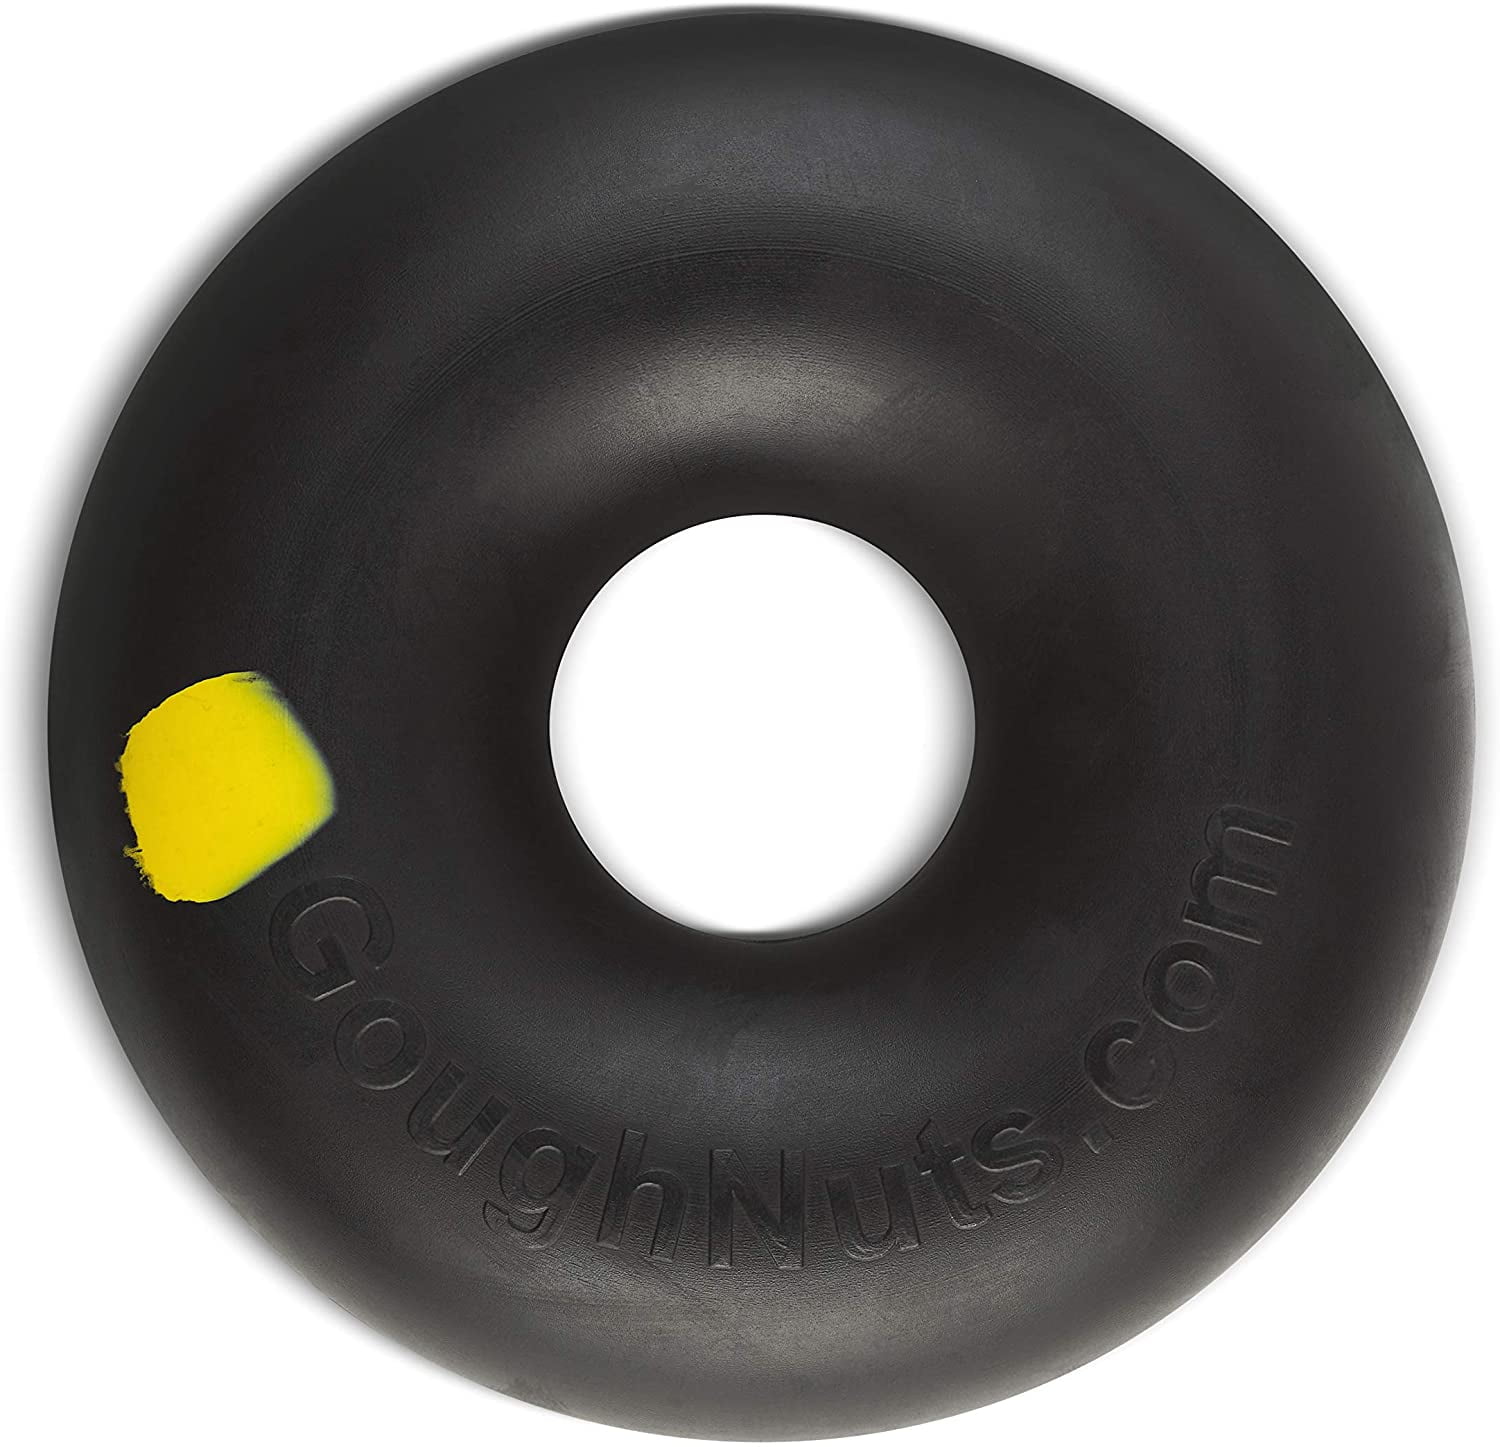 Made in the USA Durability Guaranteed Goughnuts 3" Rubber Ball Toy 